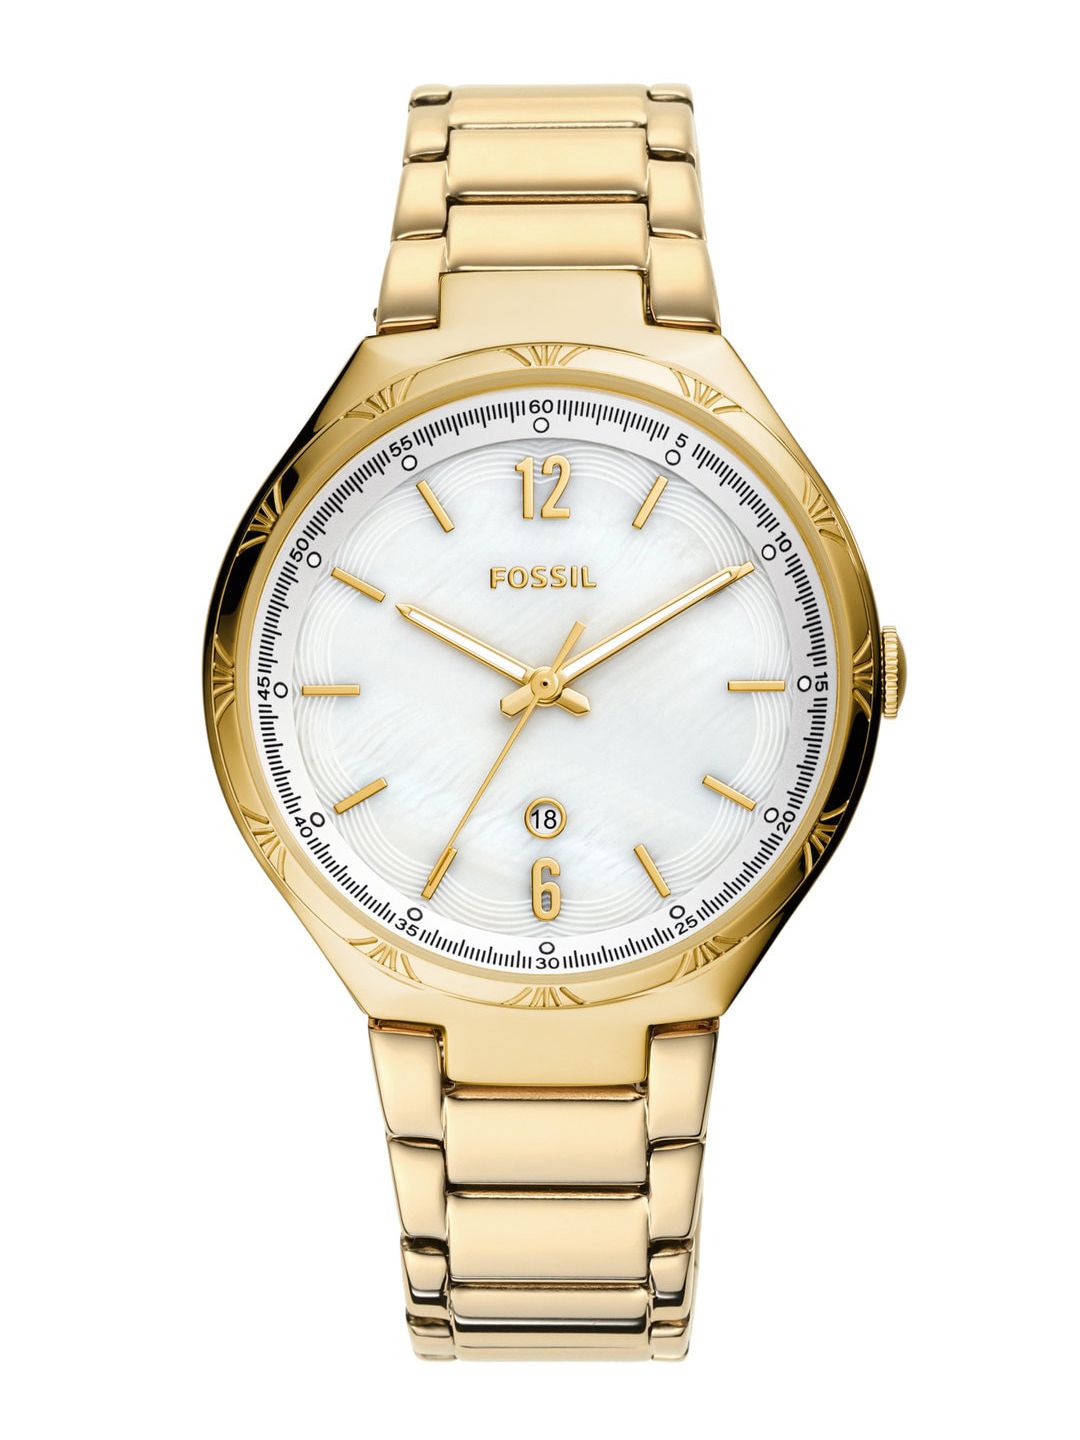 Fossil Women Gold Toned Stainless Steel Bracelet Style Analogue Watch Price in India